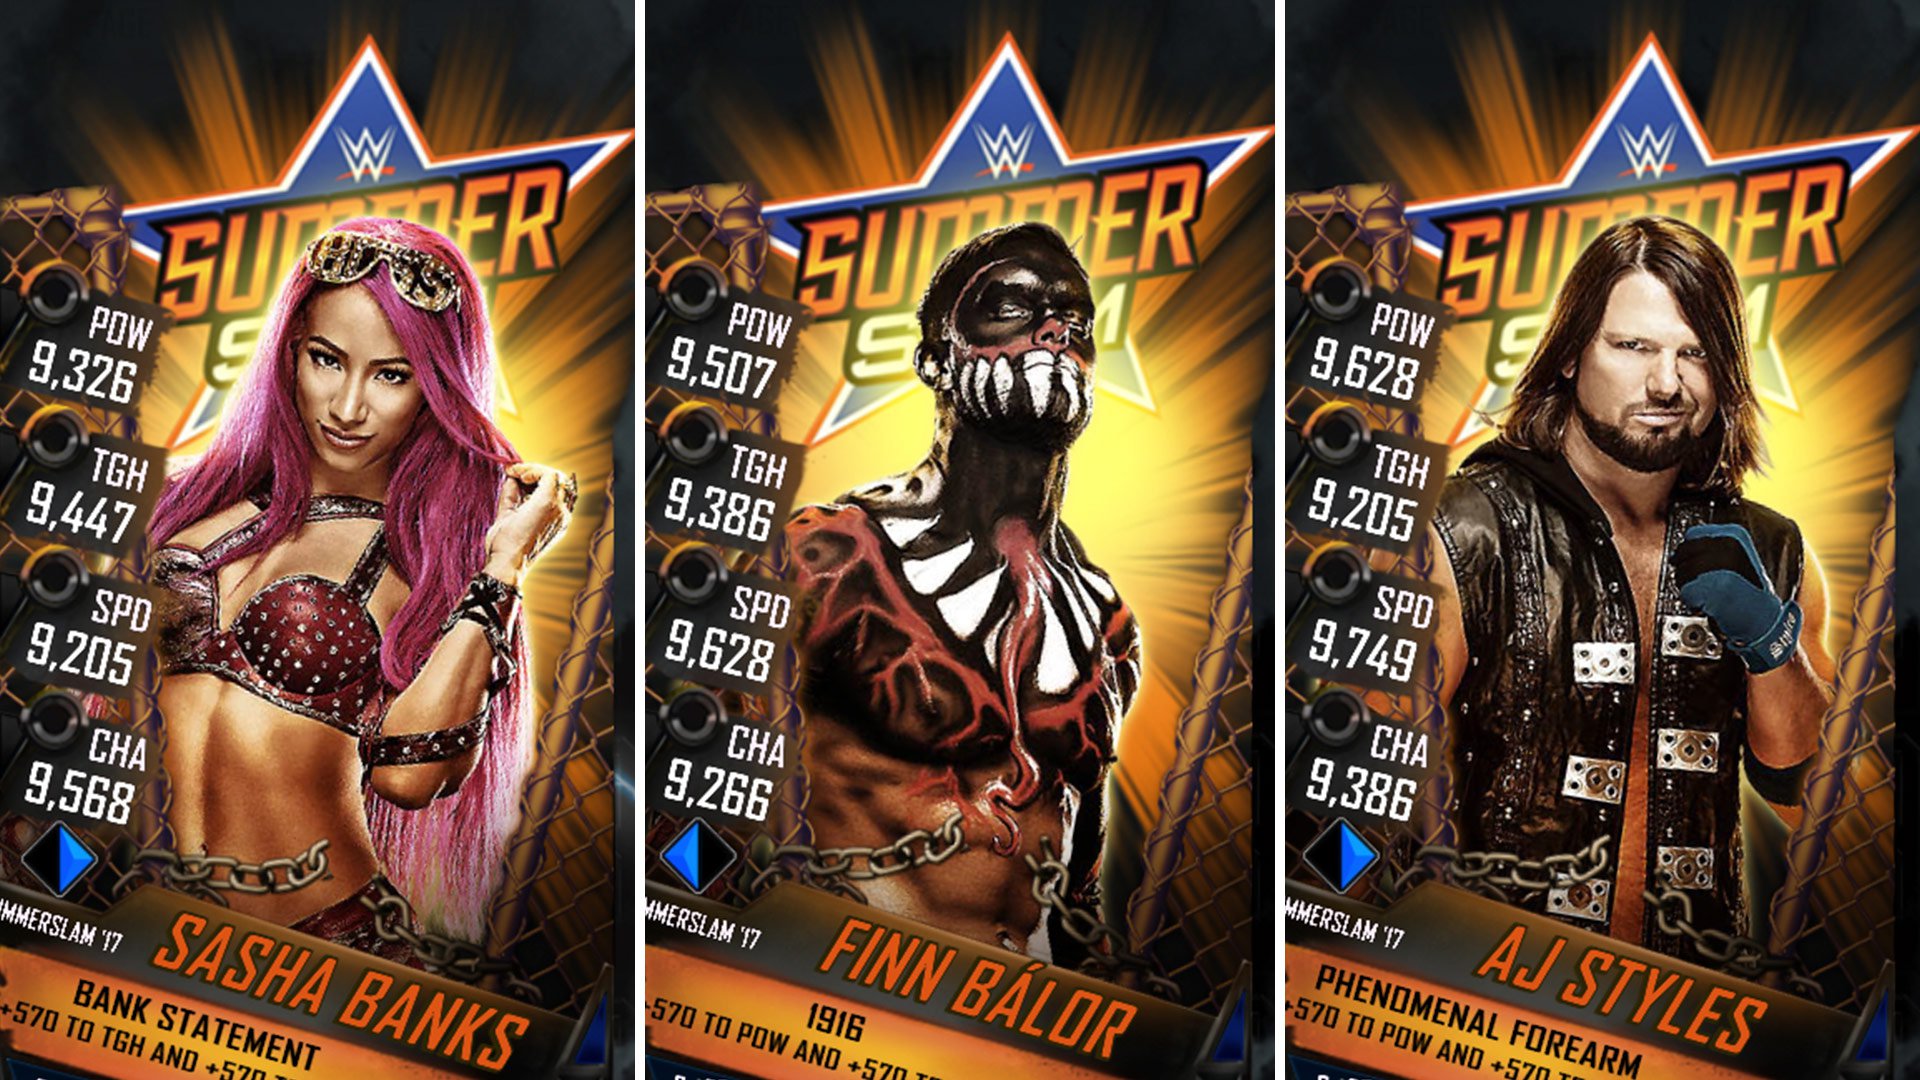 WWE SuperCard introduces new SummerSlam Tier in latest update | WWE